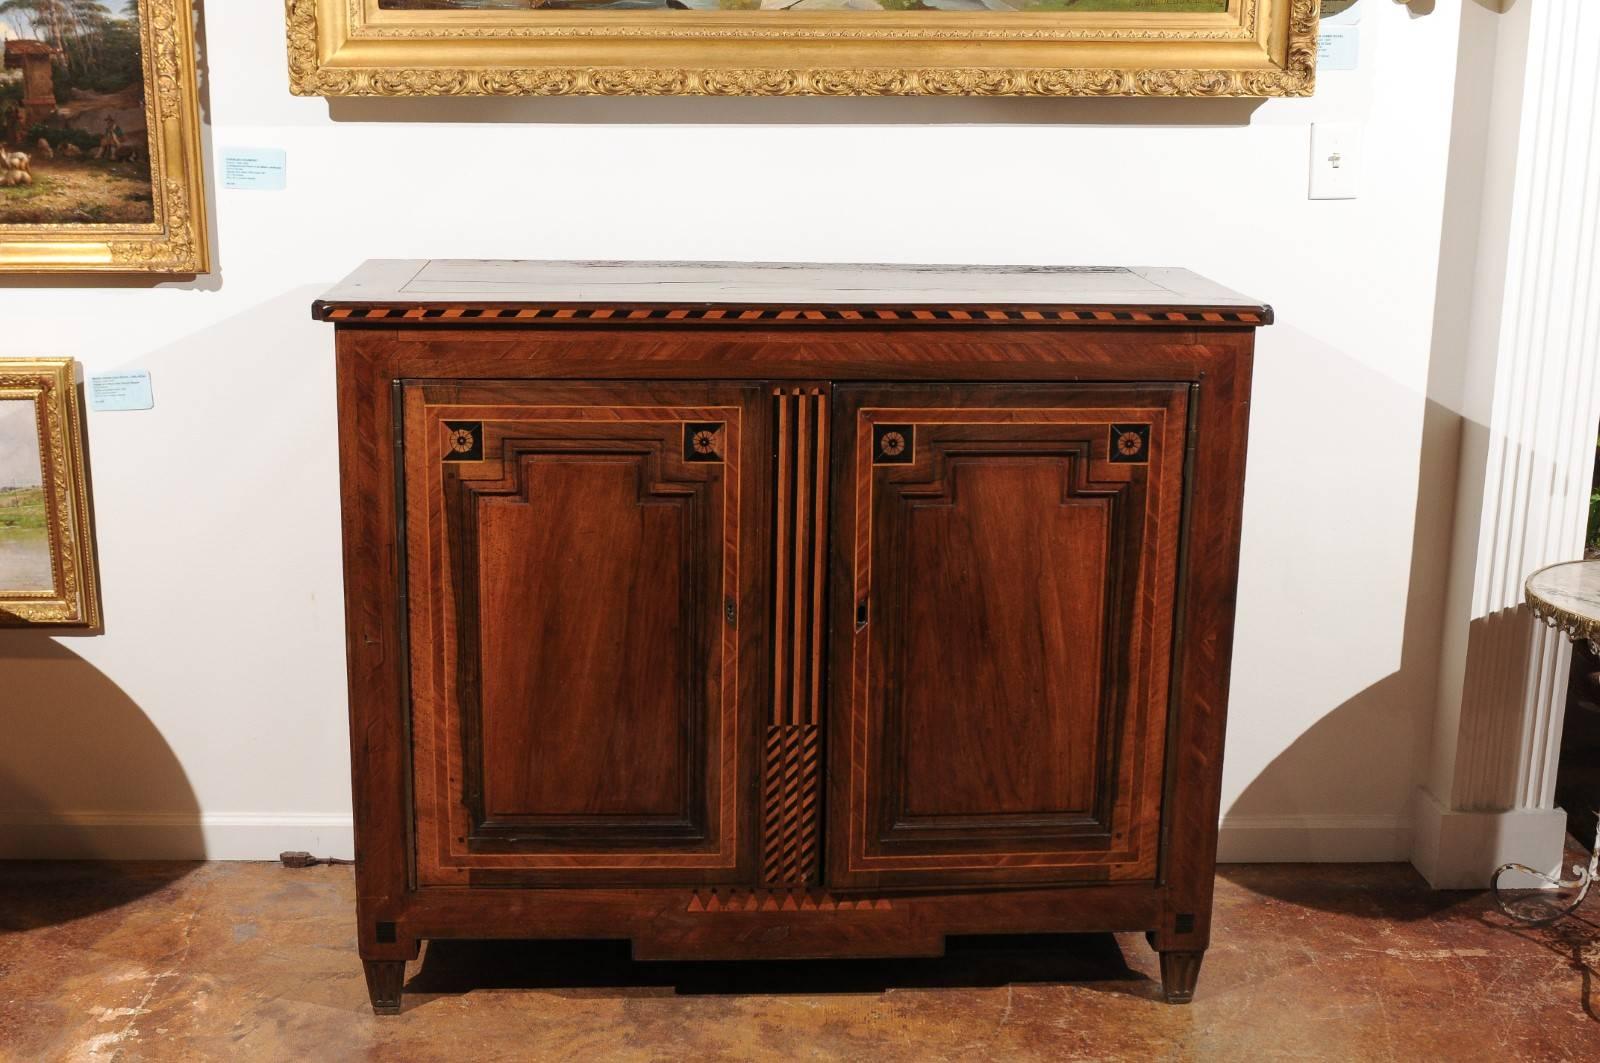 Veneer French Neoclassical Style Mahogany Buffet with Marquetry Inlay from the 1850s